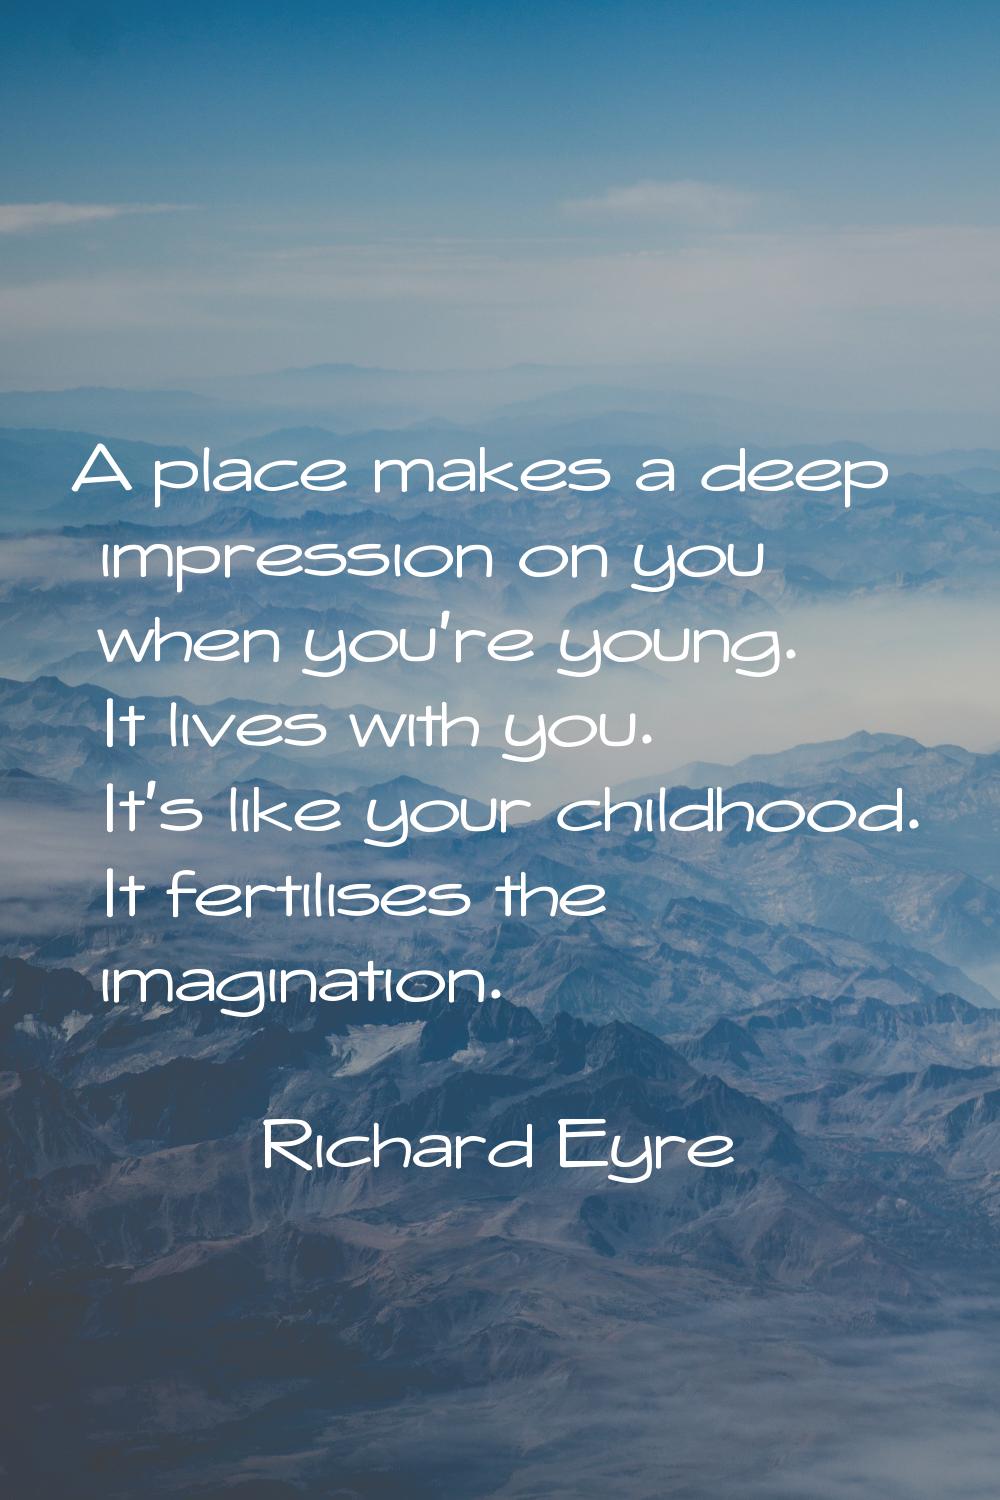 A place makes a deep impression on you when you're young. It lives with you. It's like your childho